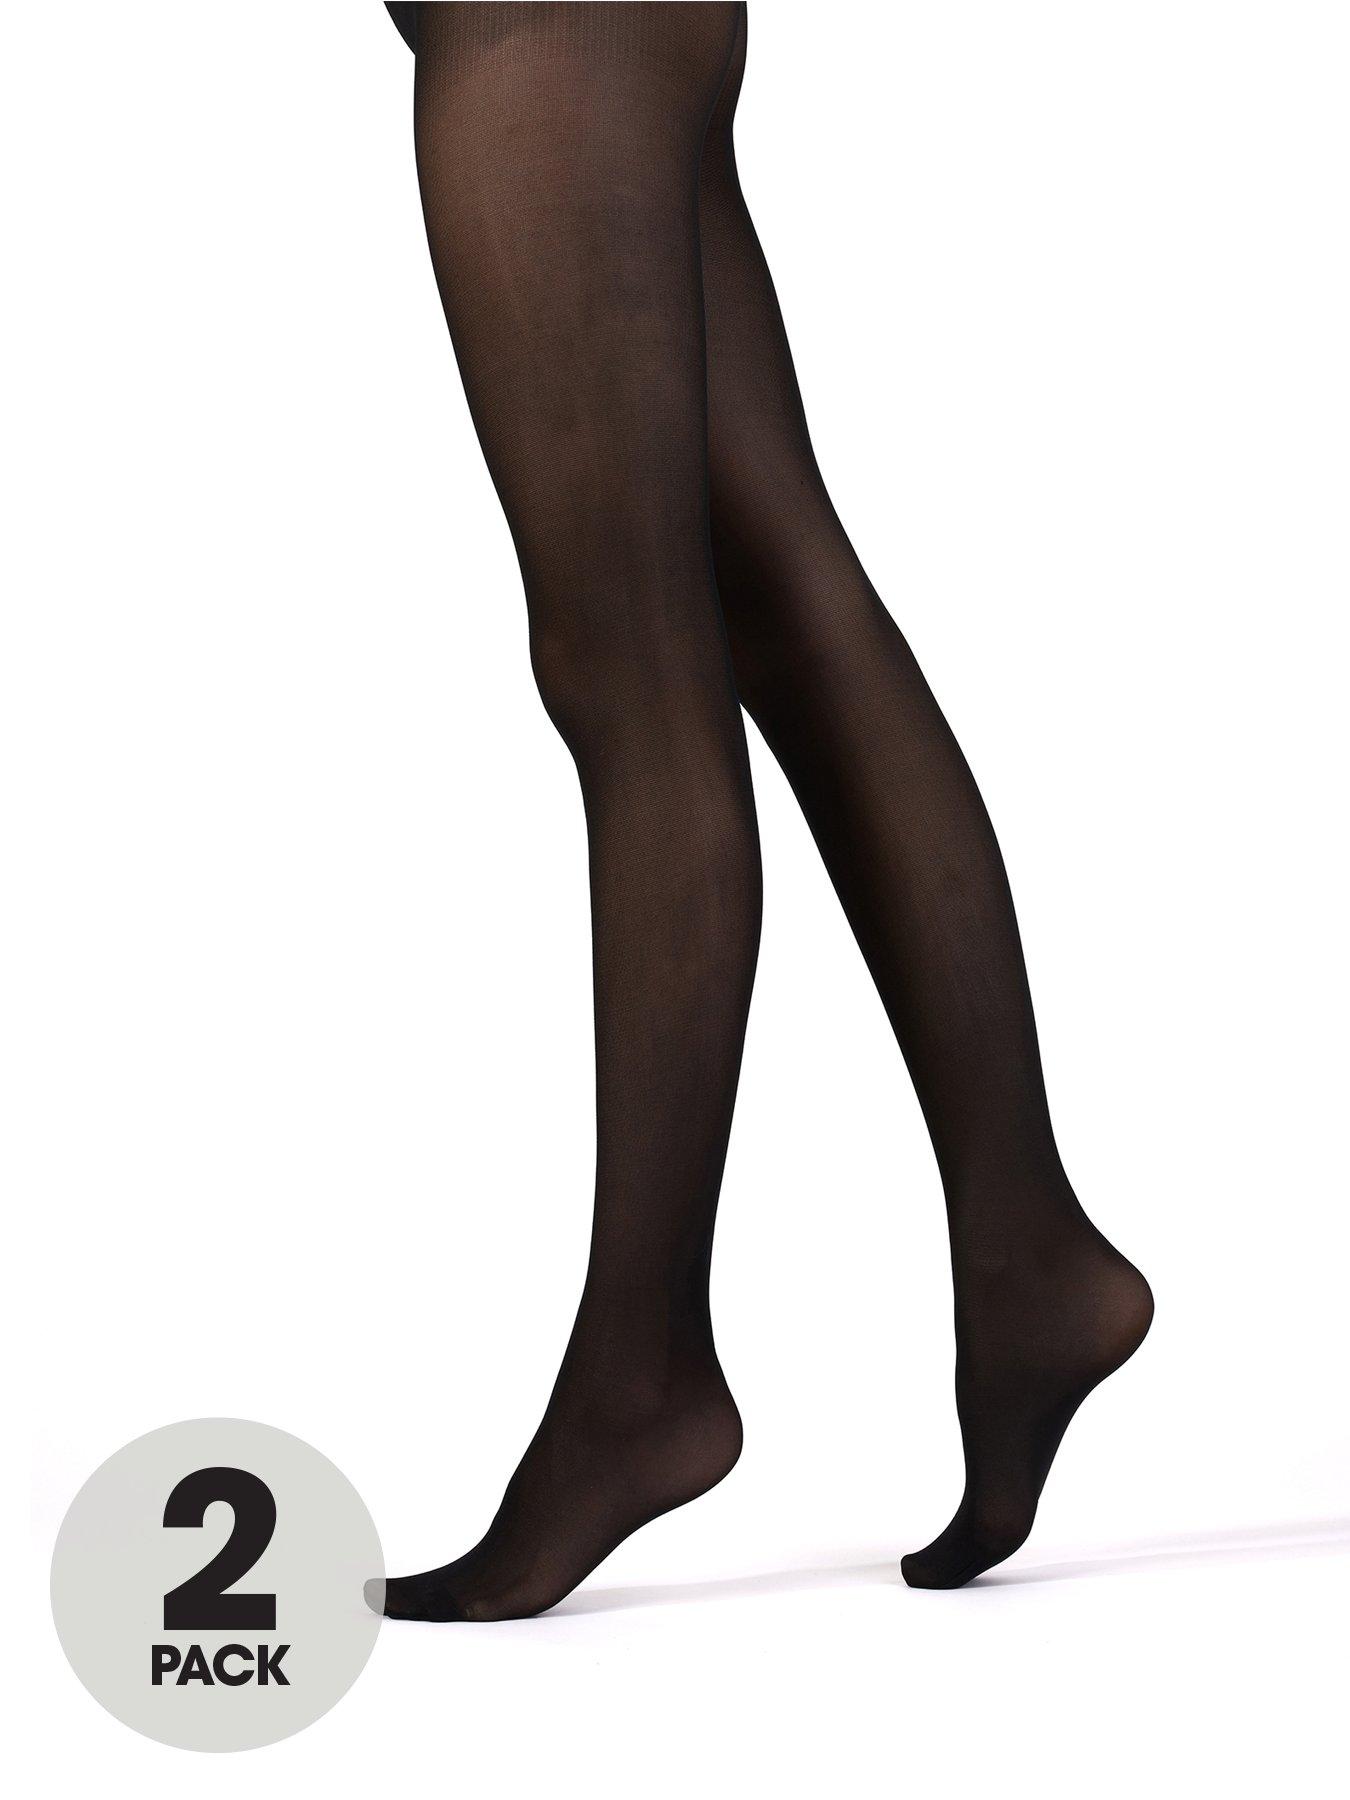 Pack of 2 pairs of 70 denier tights - Tights - ACCESSORIES - Woman